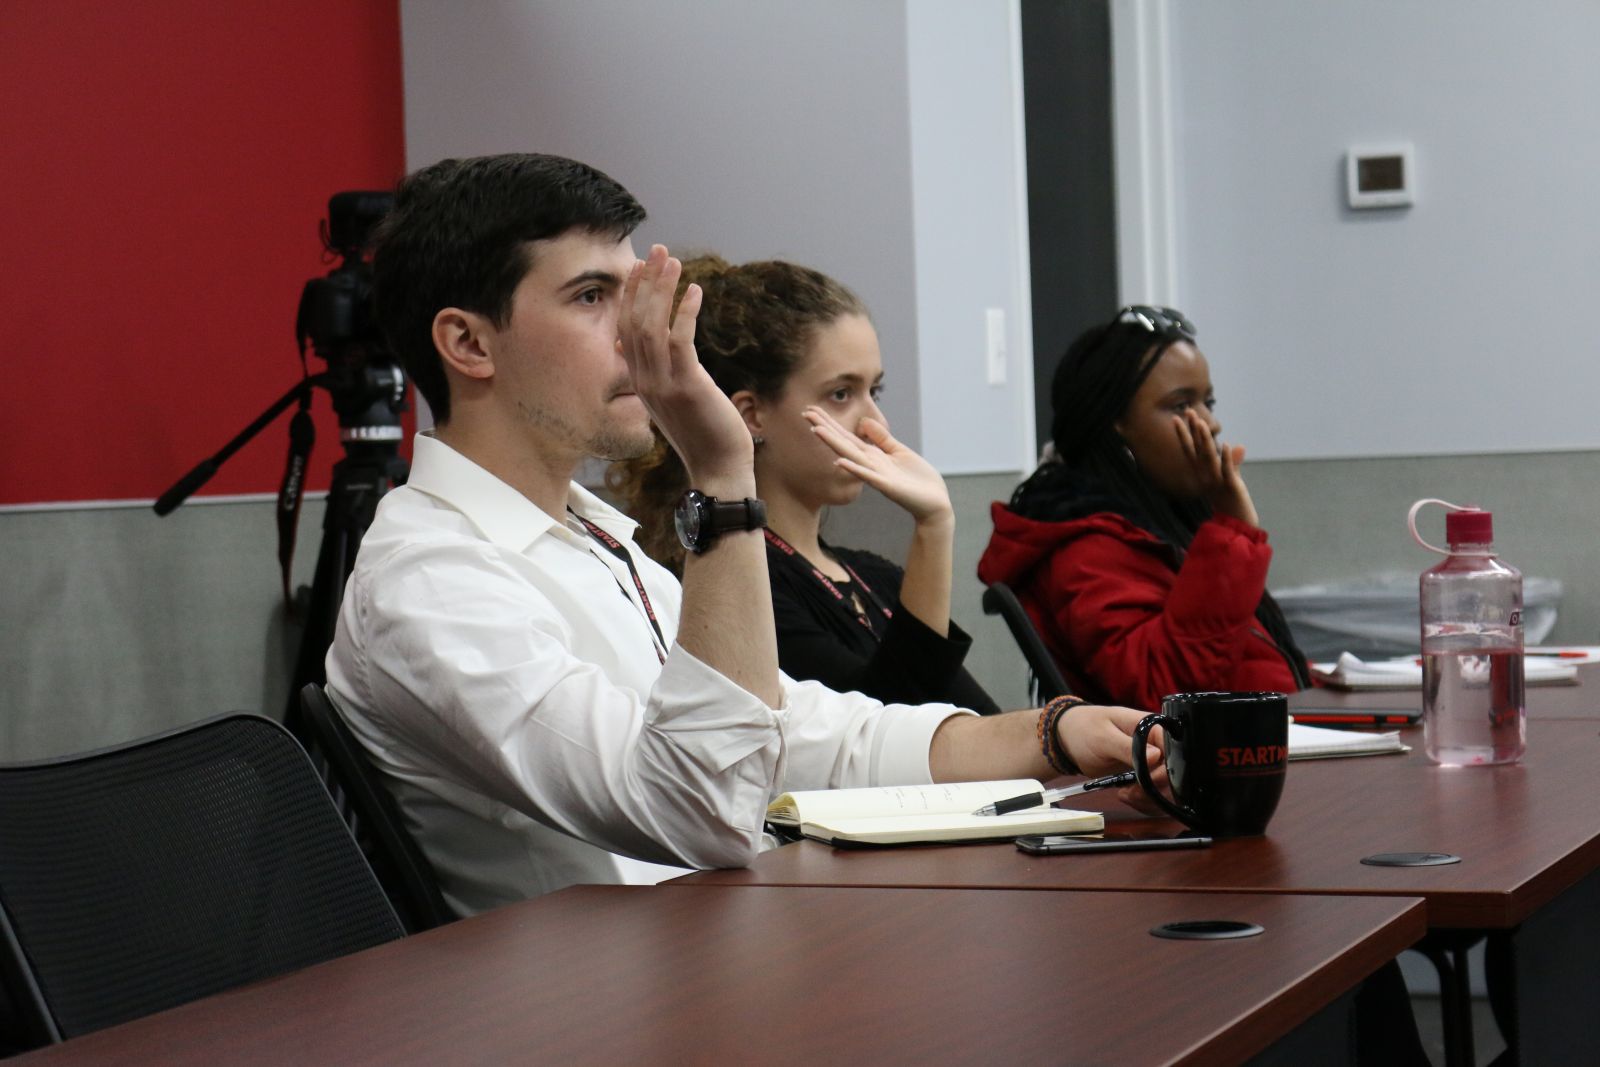 Students participate in a discussion at START